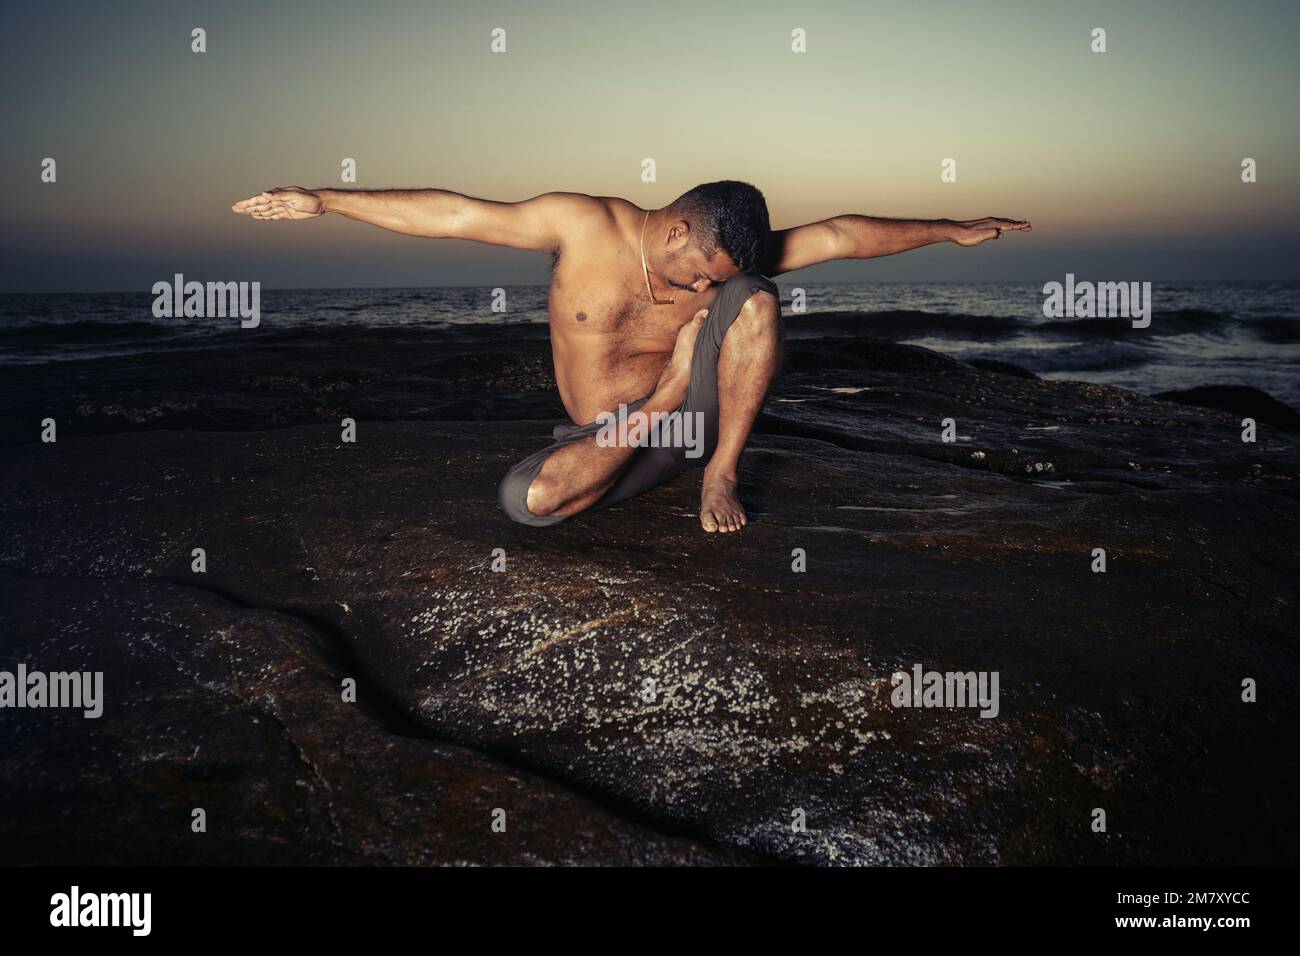 Indian Male Model Performing Yoga Postures Stock Photo